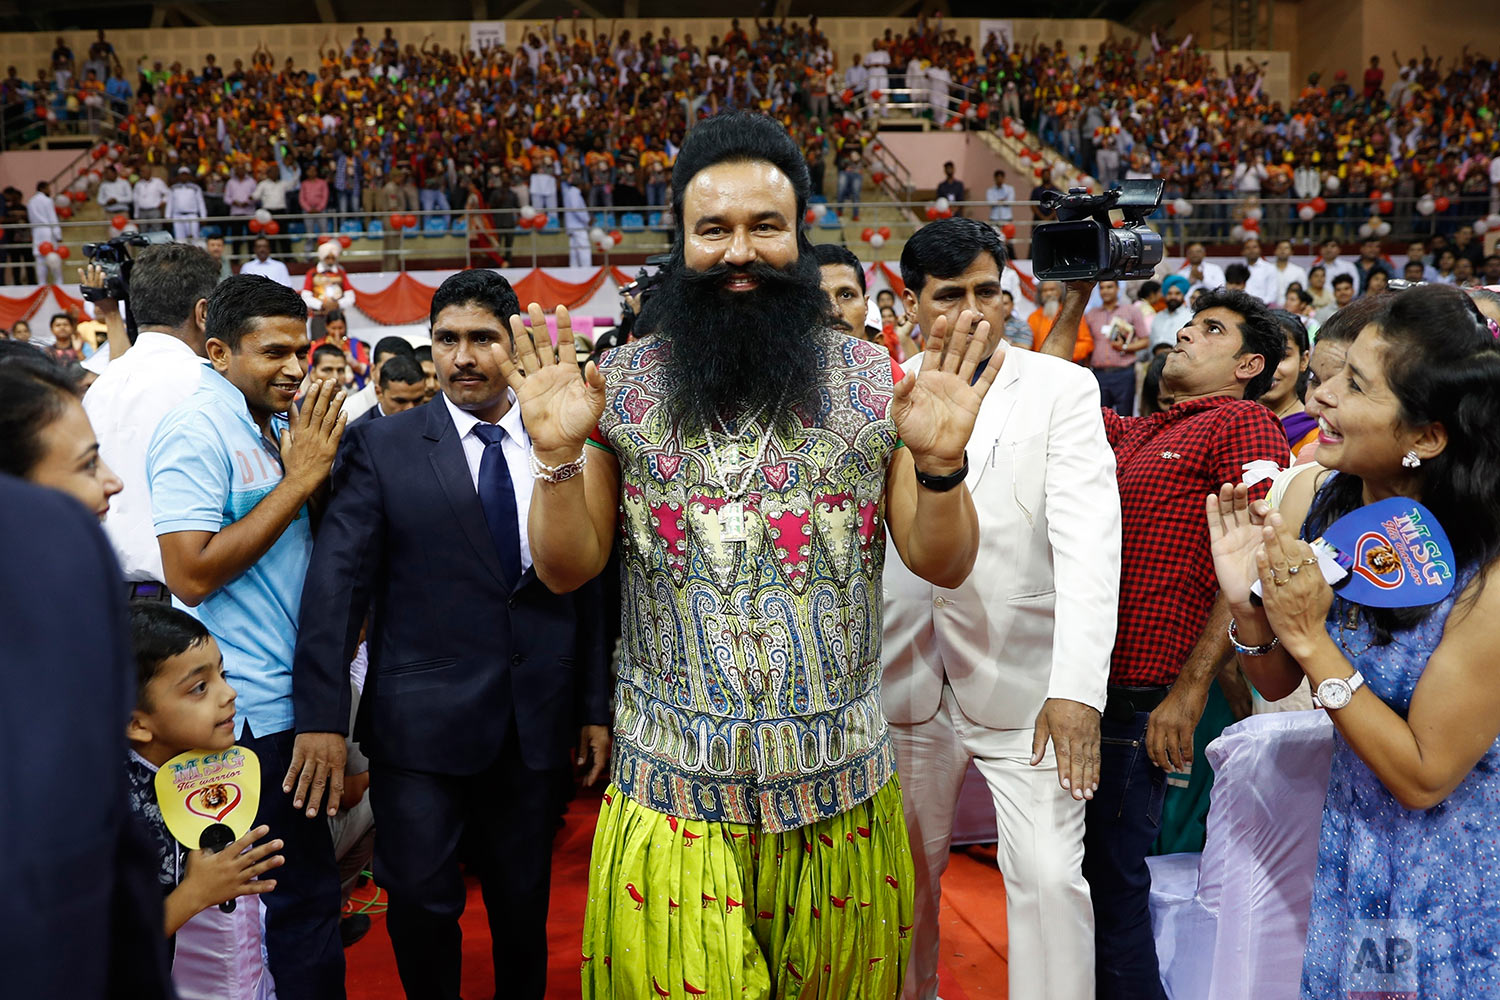  In this Oct. 5, 2016 photo, Indian spiritual guru who calls himself Dr. Saint Gurmeet Singh Ram Rahim Insan, center, greets followers as he arrives for a press conference ahead of the release of his new movie "MSG, The Warrior Lion Heart," in New De